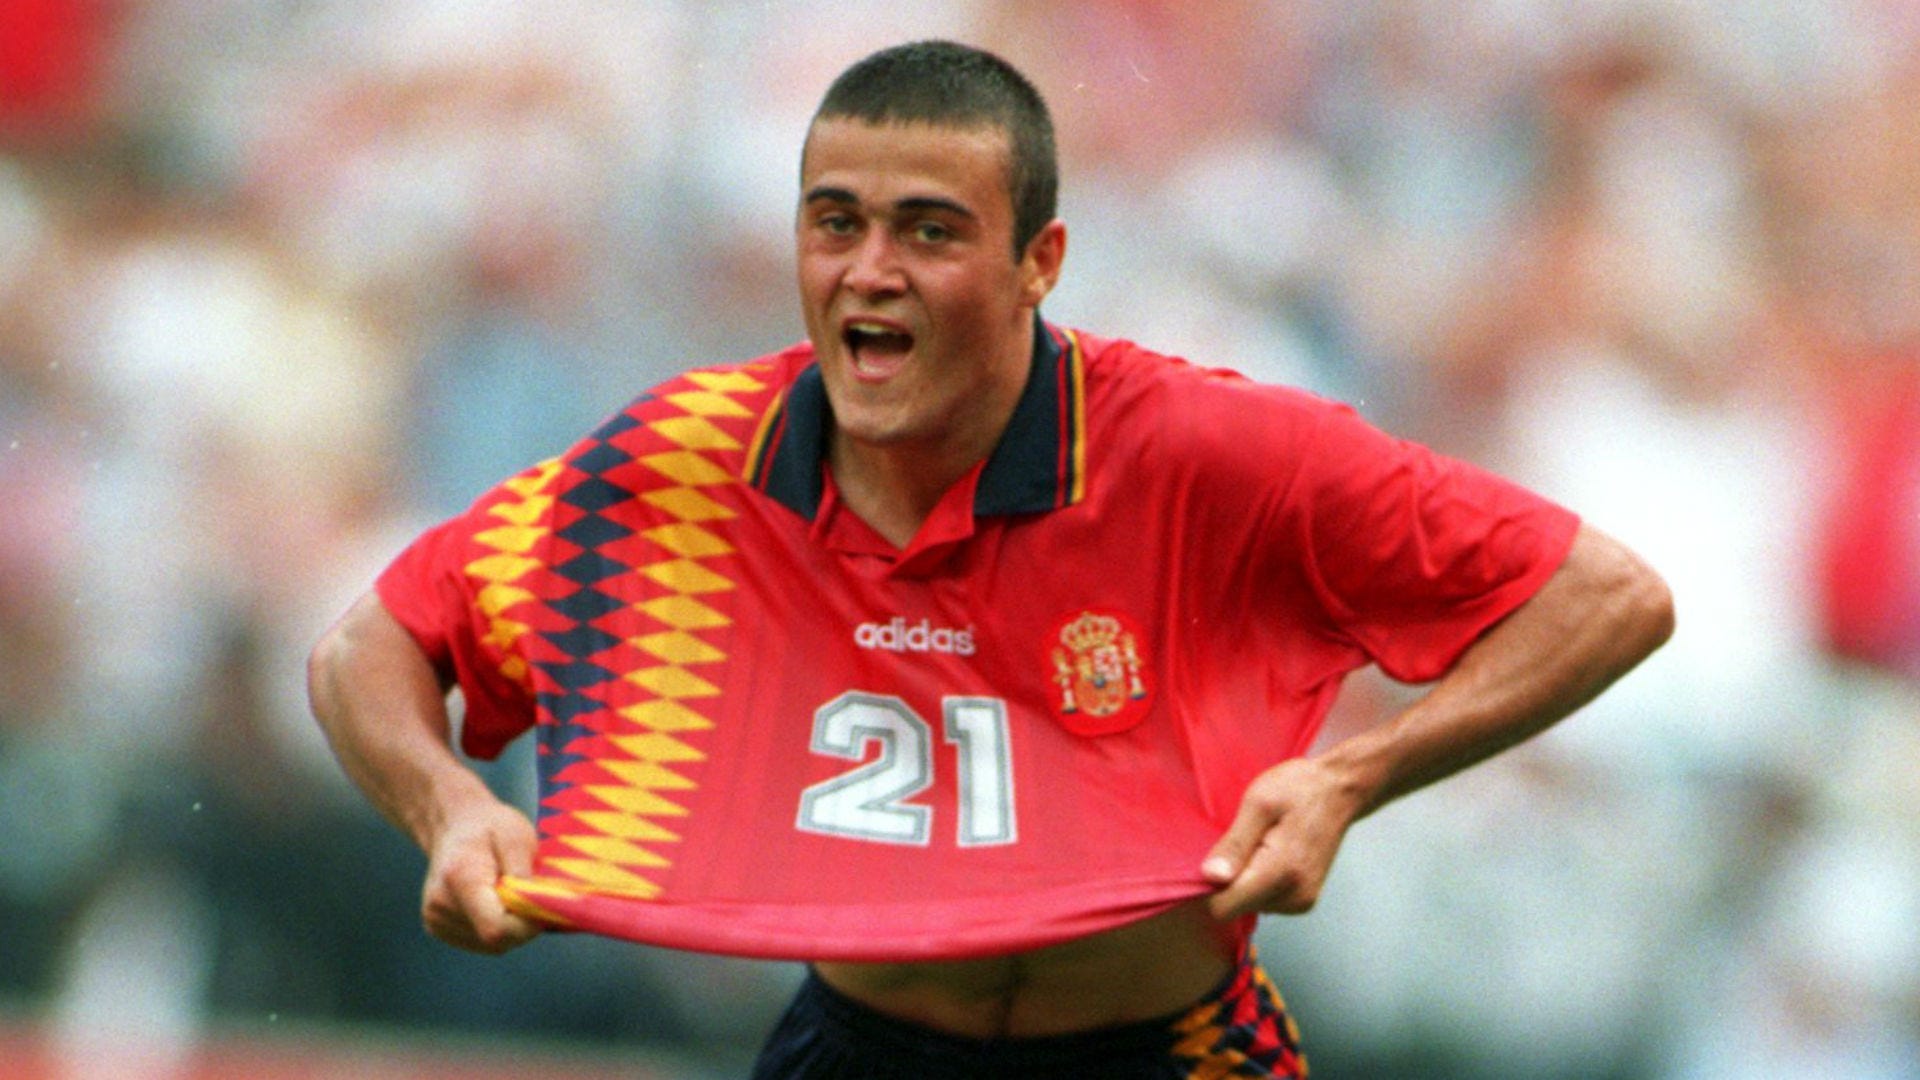 Spain World Cup kit: New retro Adidas design, controversy all you to | Goal.com US